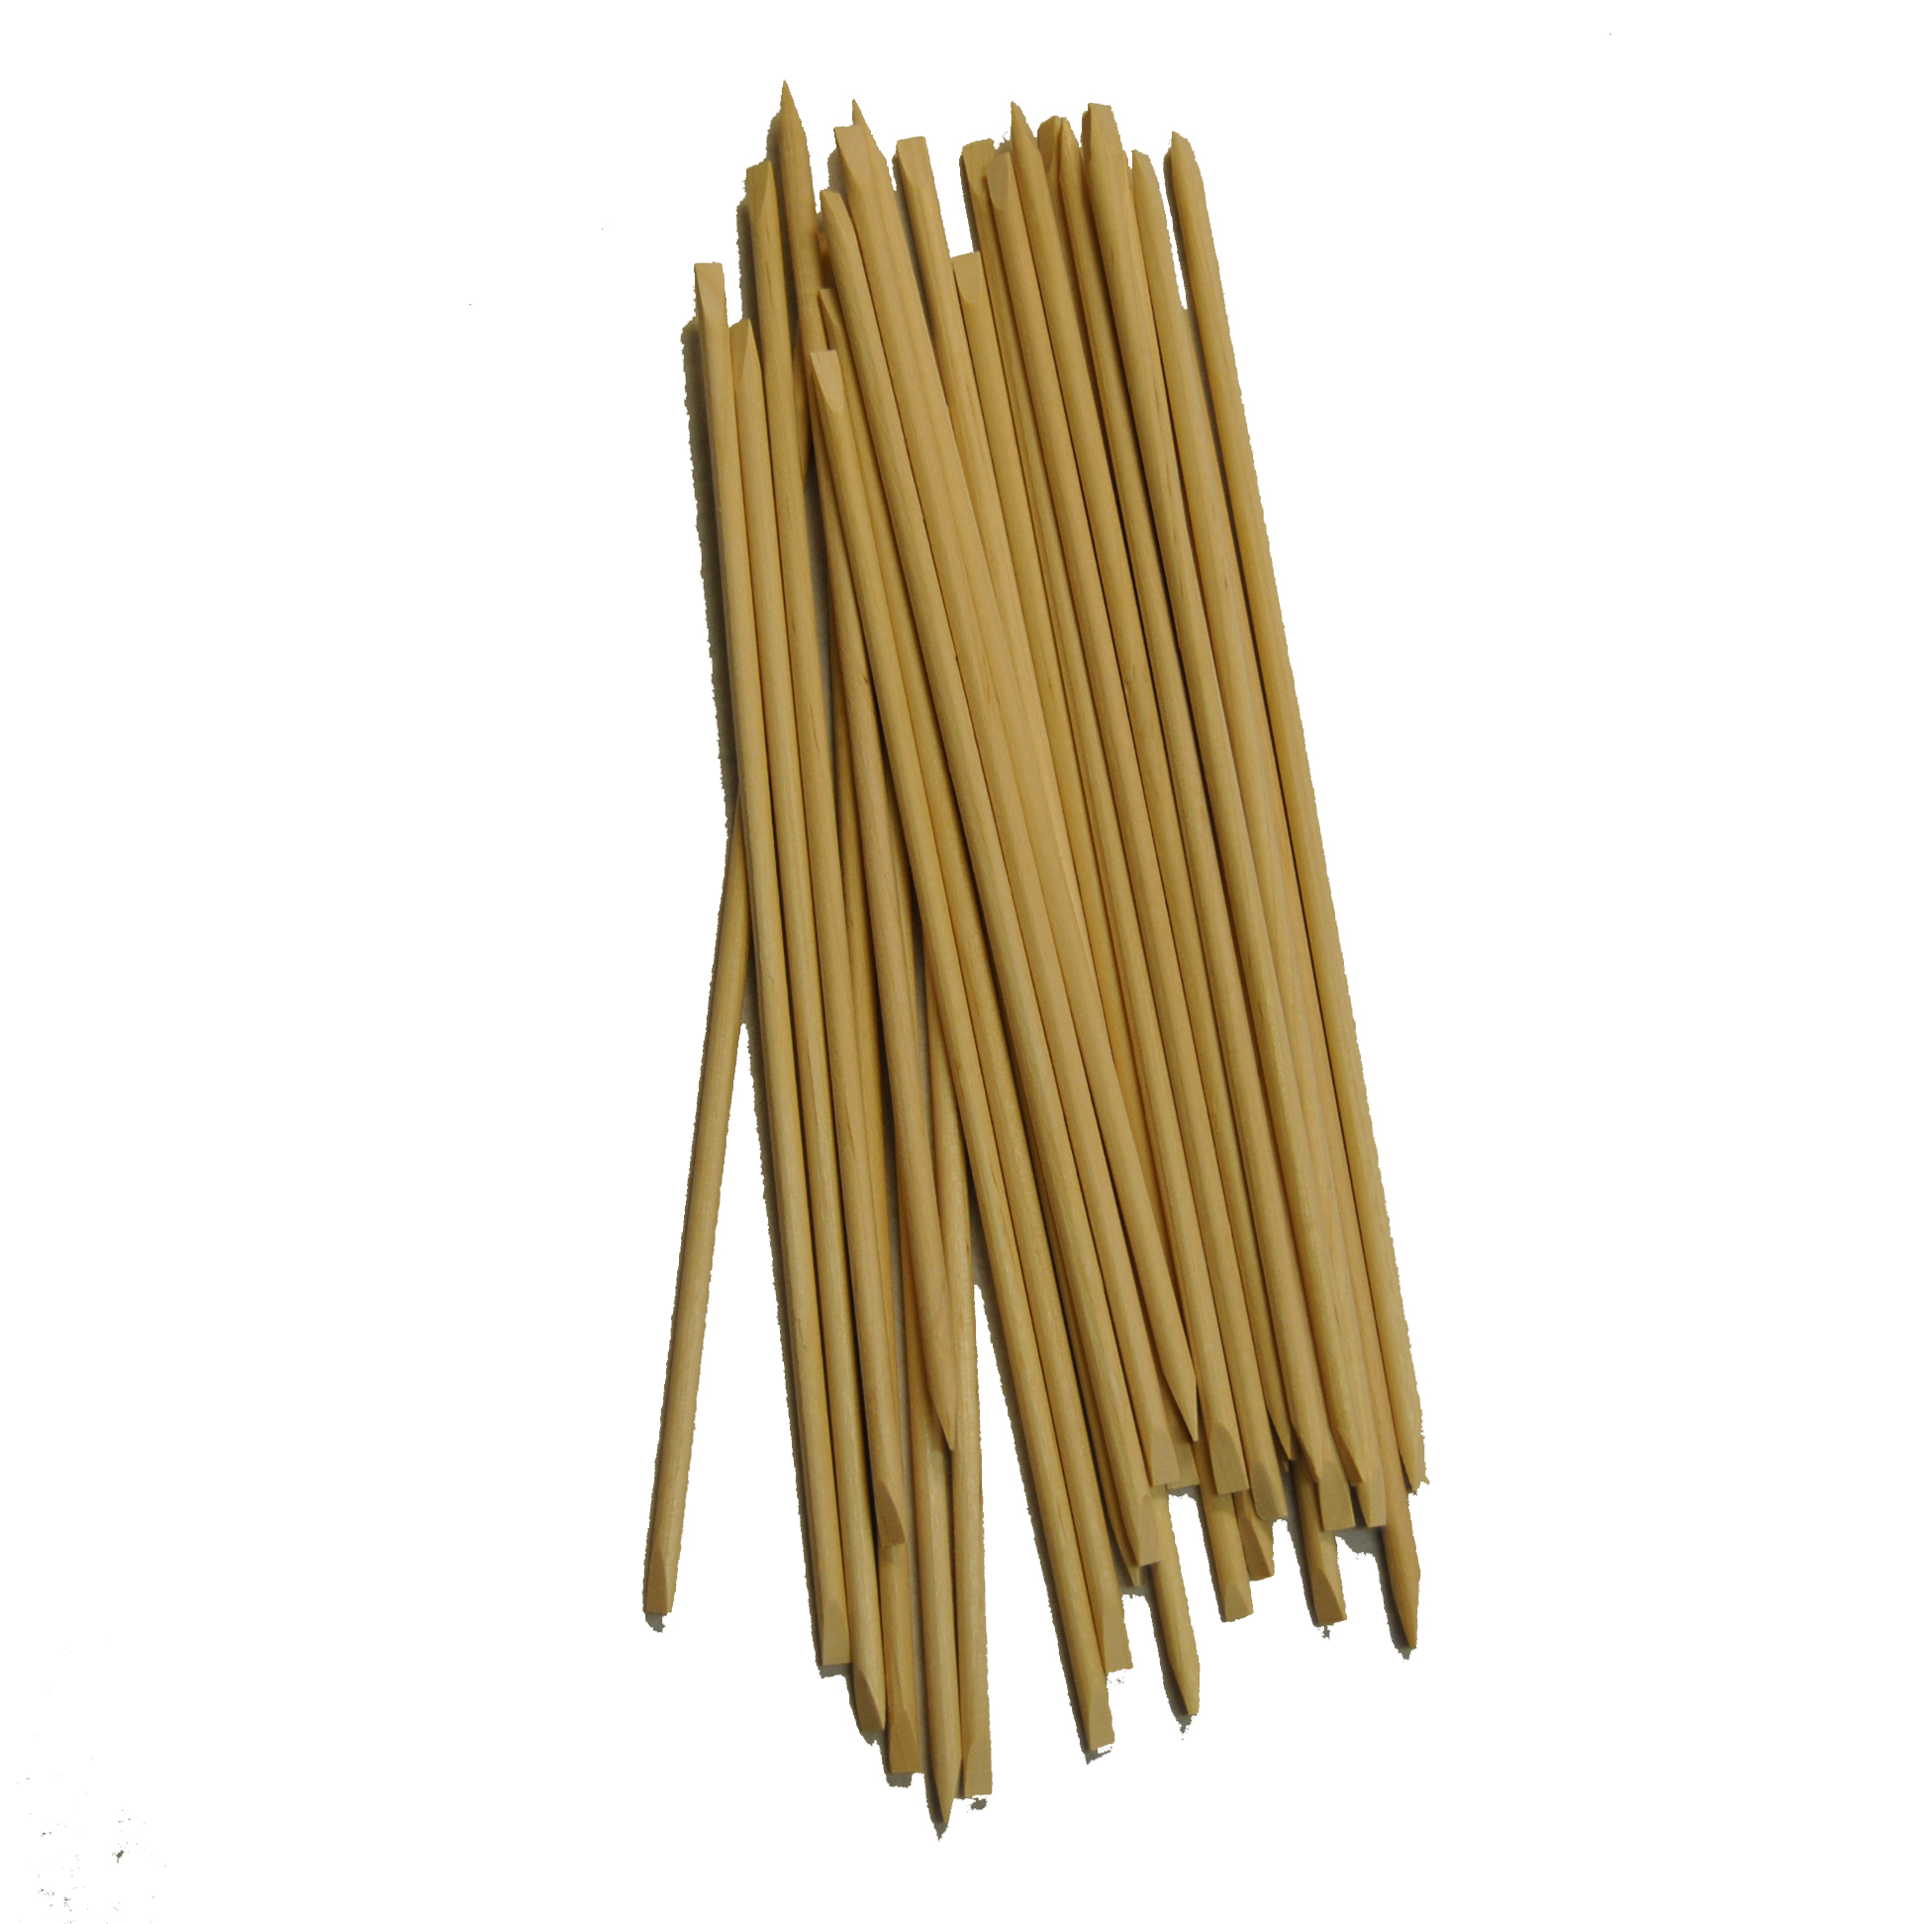 7 Coffee Stirrers With Round Ends Box of 1,000ct (Item# FS203)